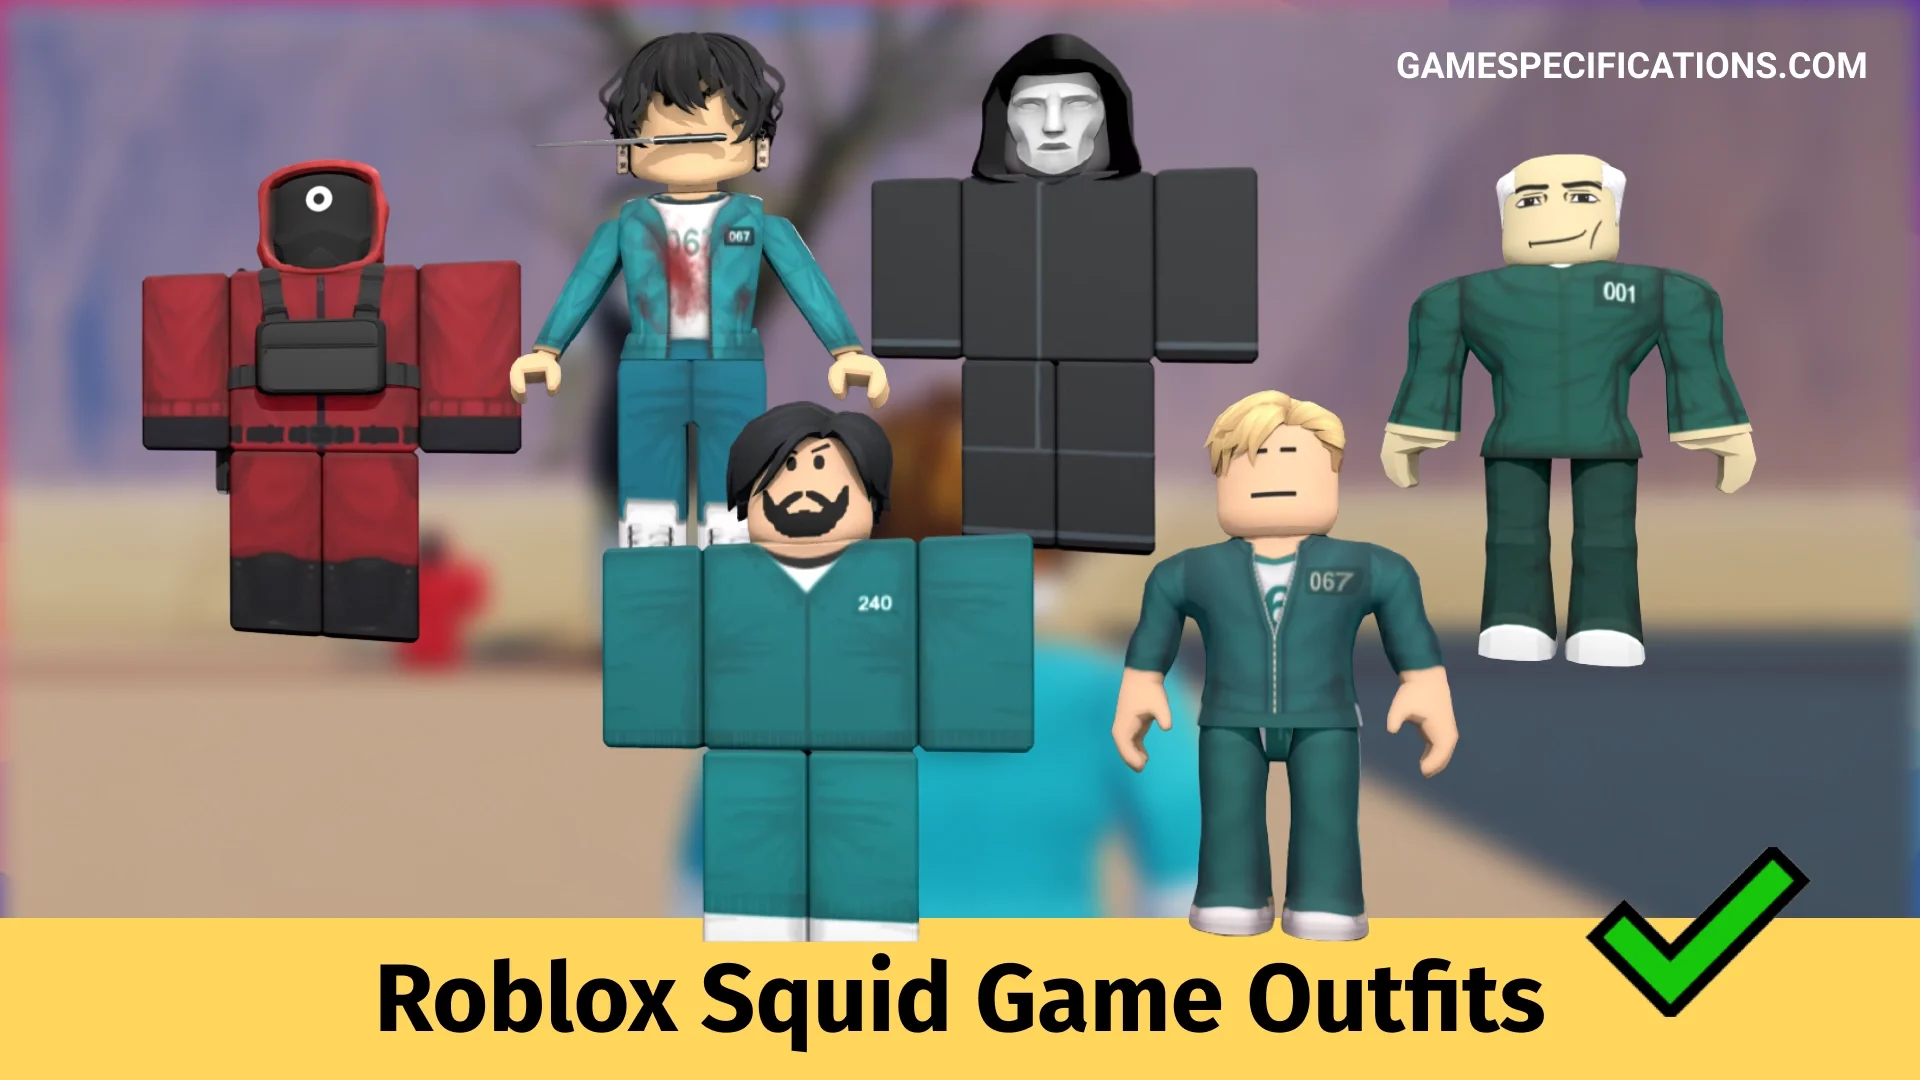 Roblox Squid Game Outfits [2023] - Game Specifications